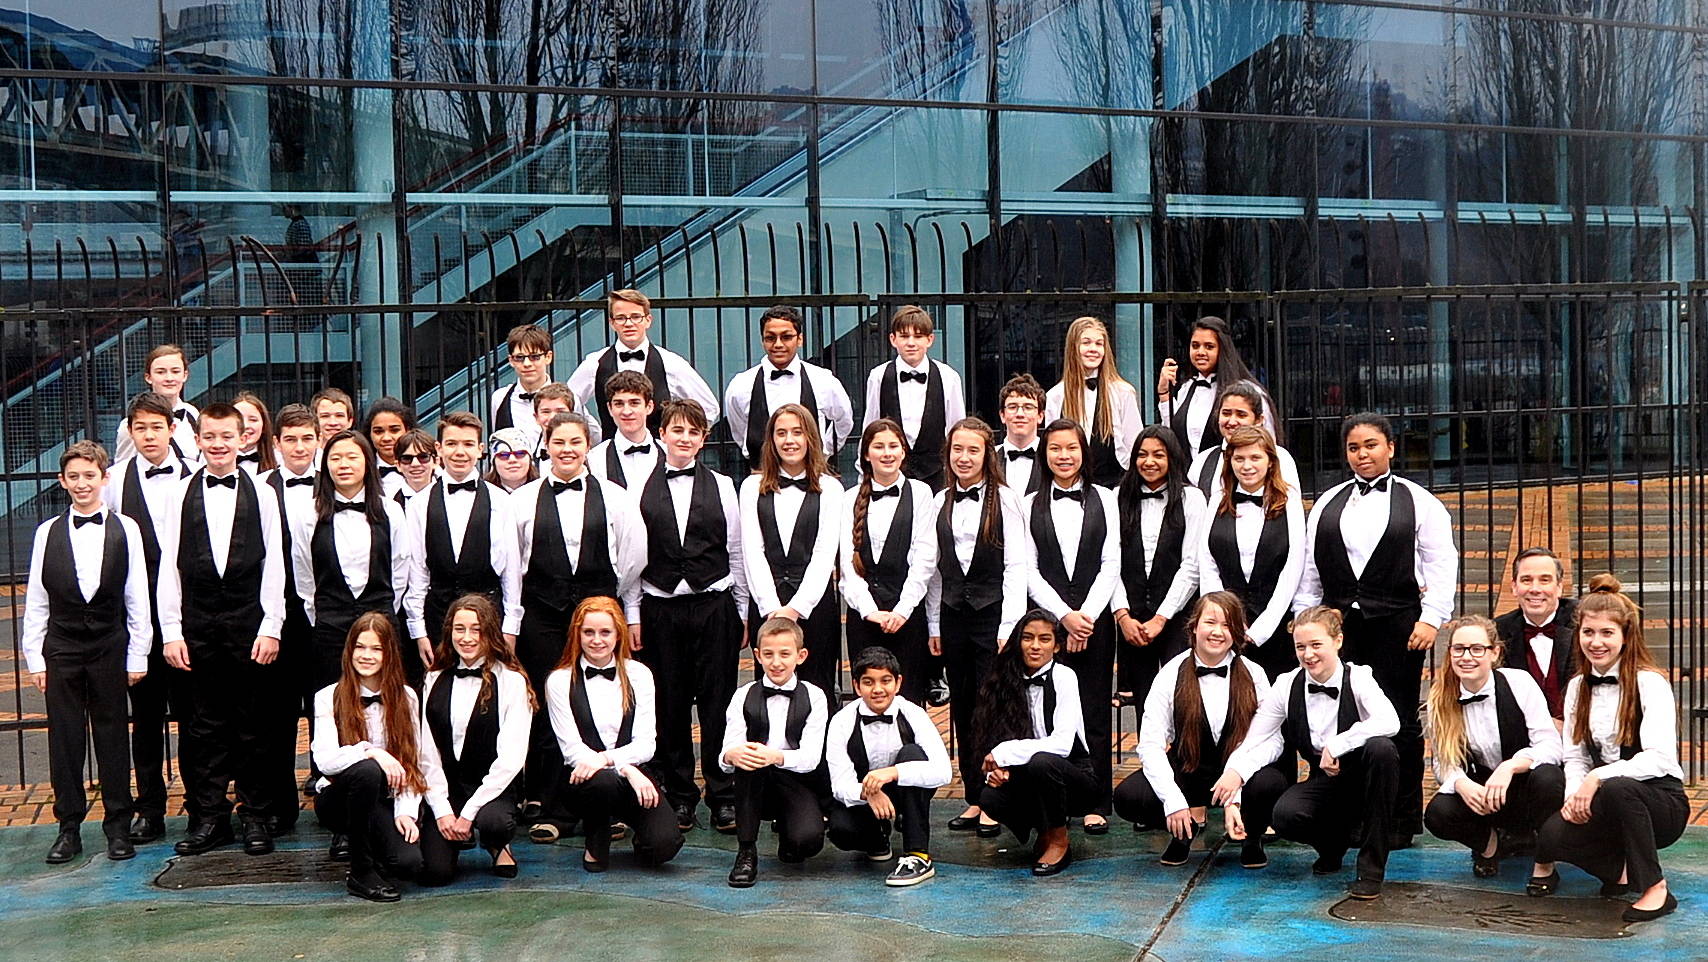 Kirkland middle school band students to perform with the Alchemy Tap Project